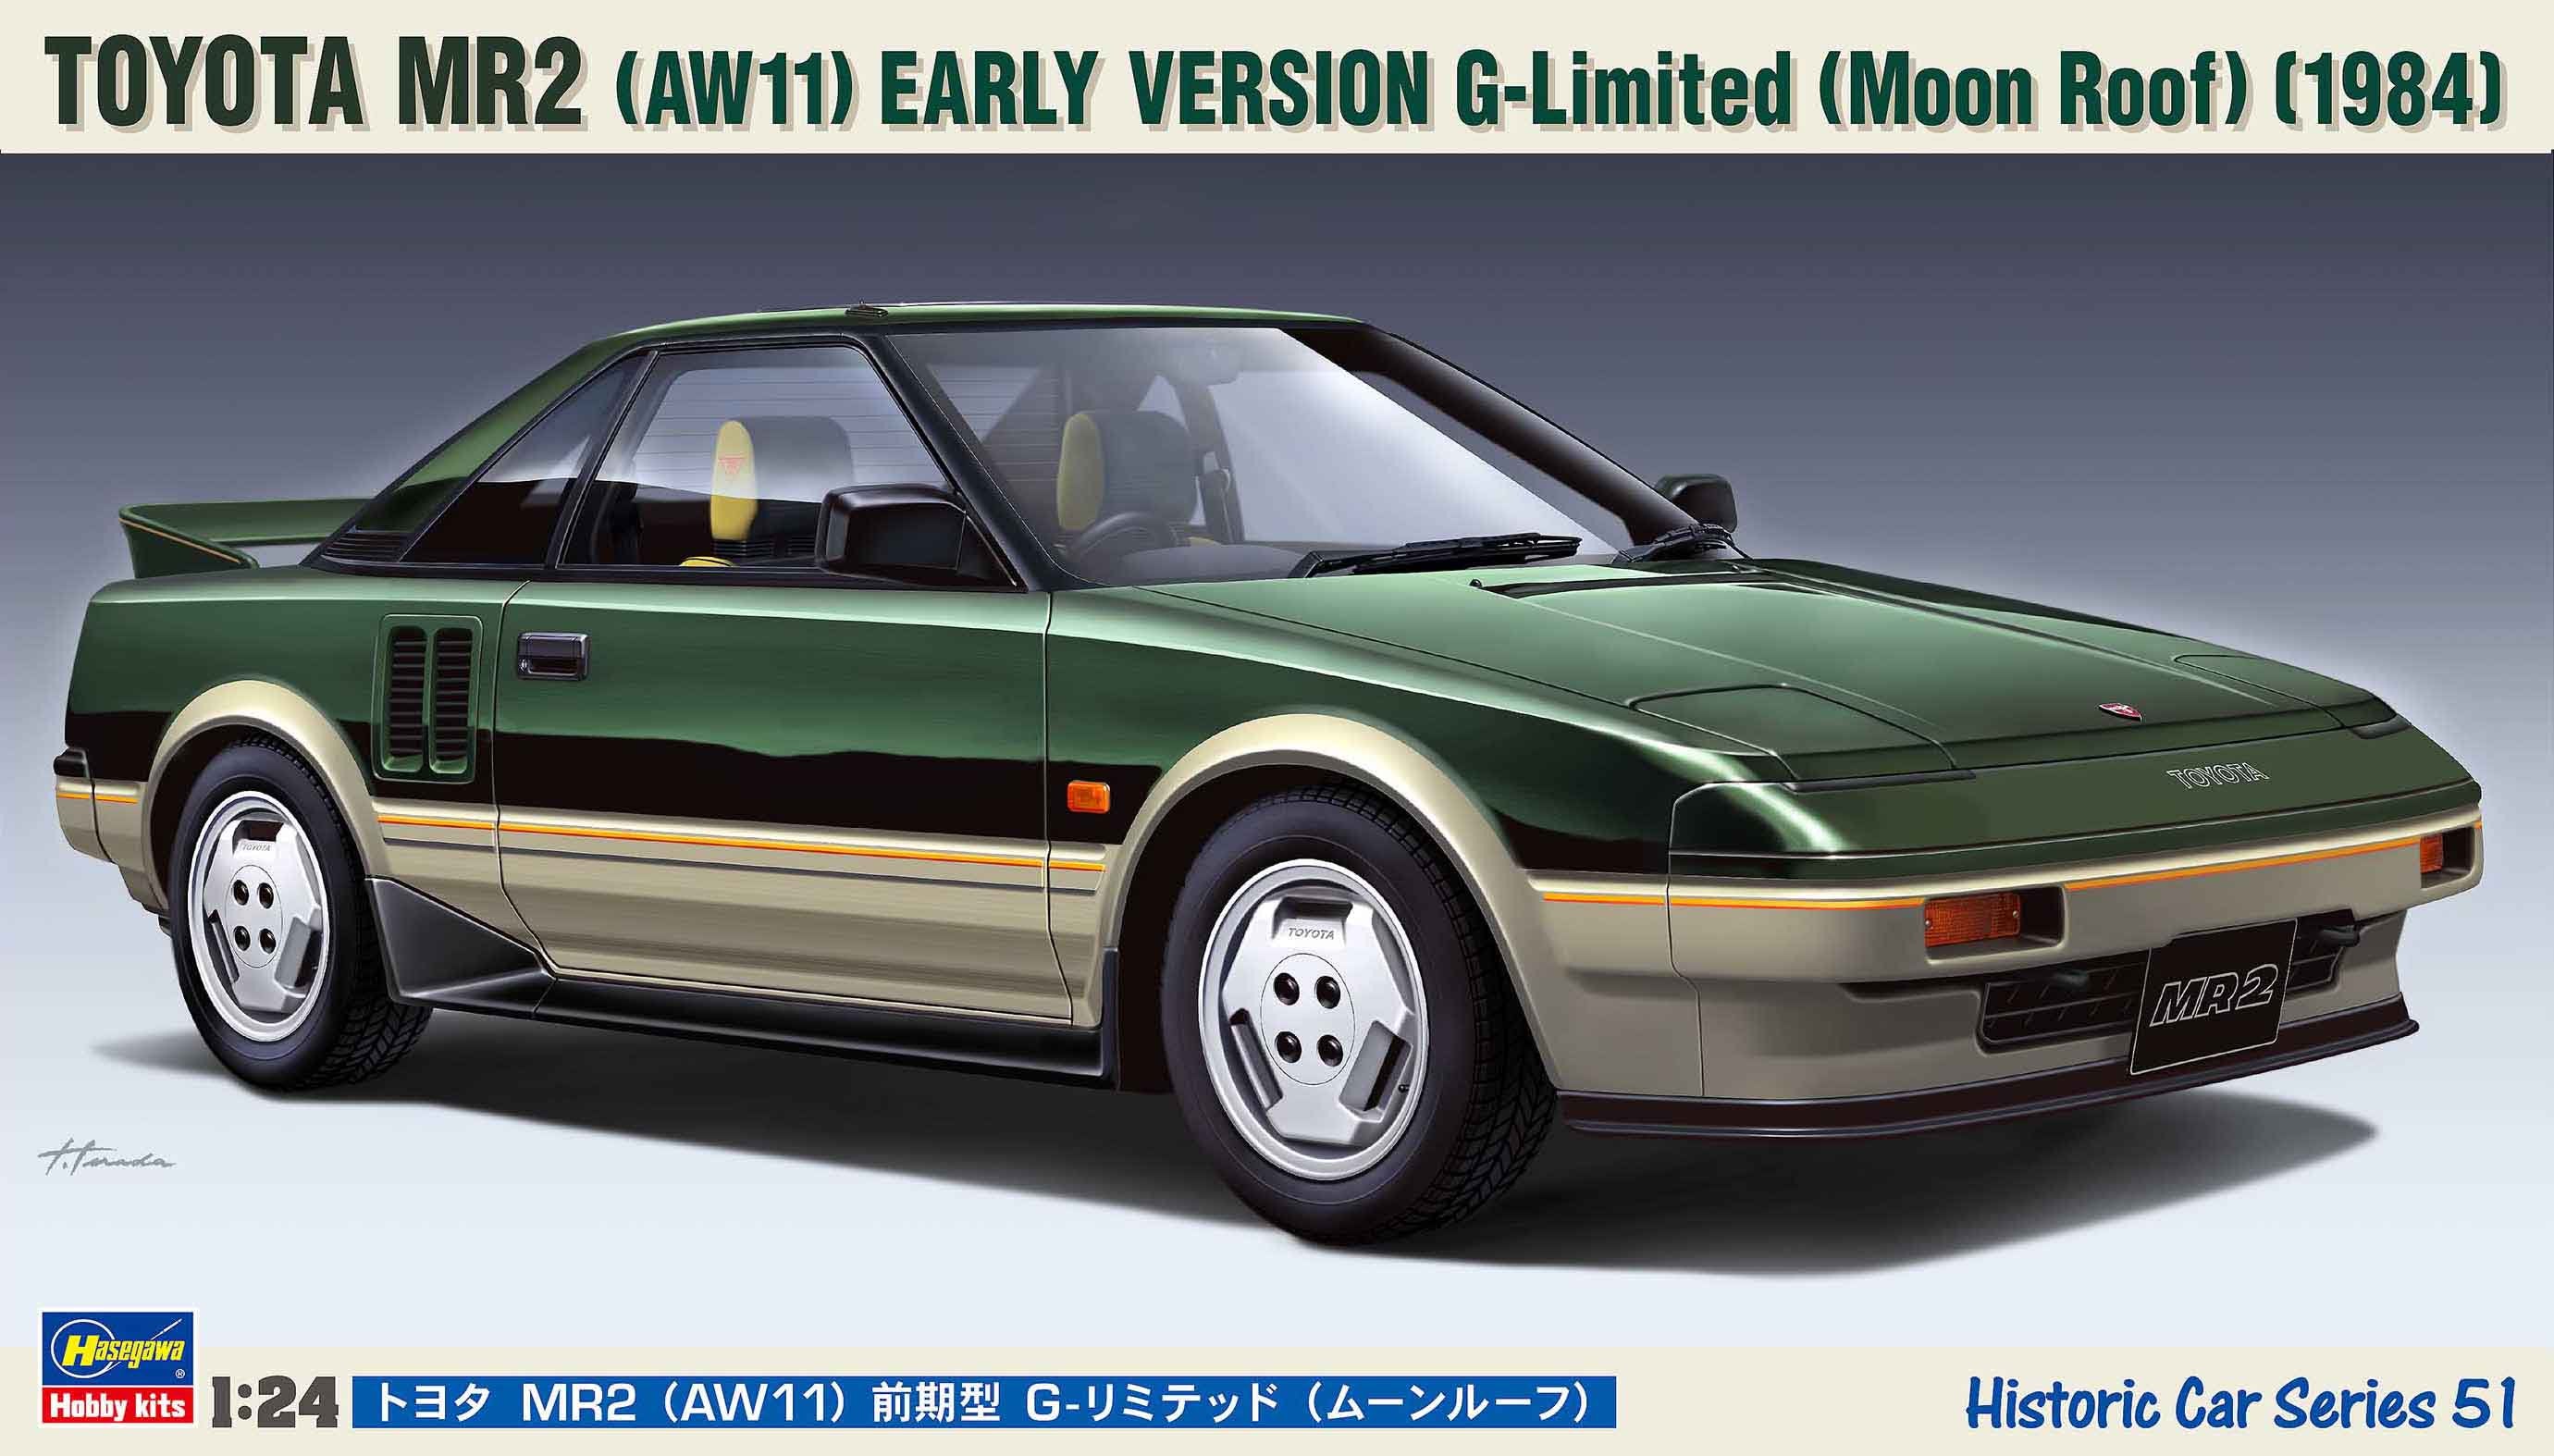 Toyota MR2 (AW11) Early Version G-Limited (Moon Roof) 1/24 #21151 by Hasegawa